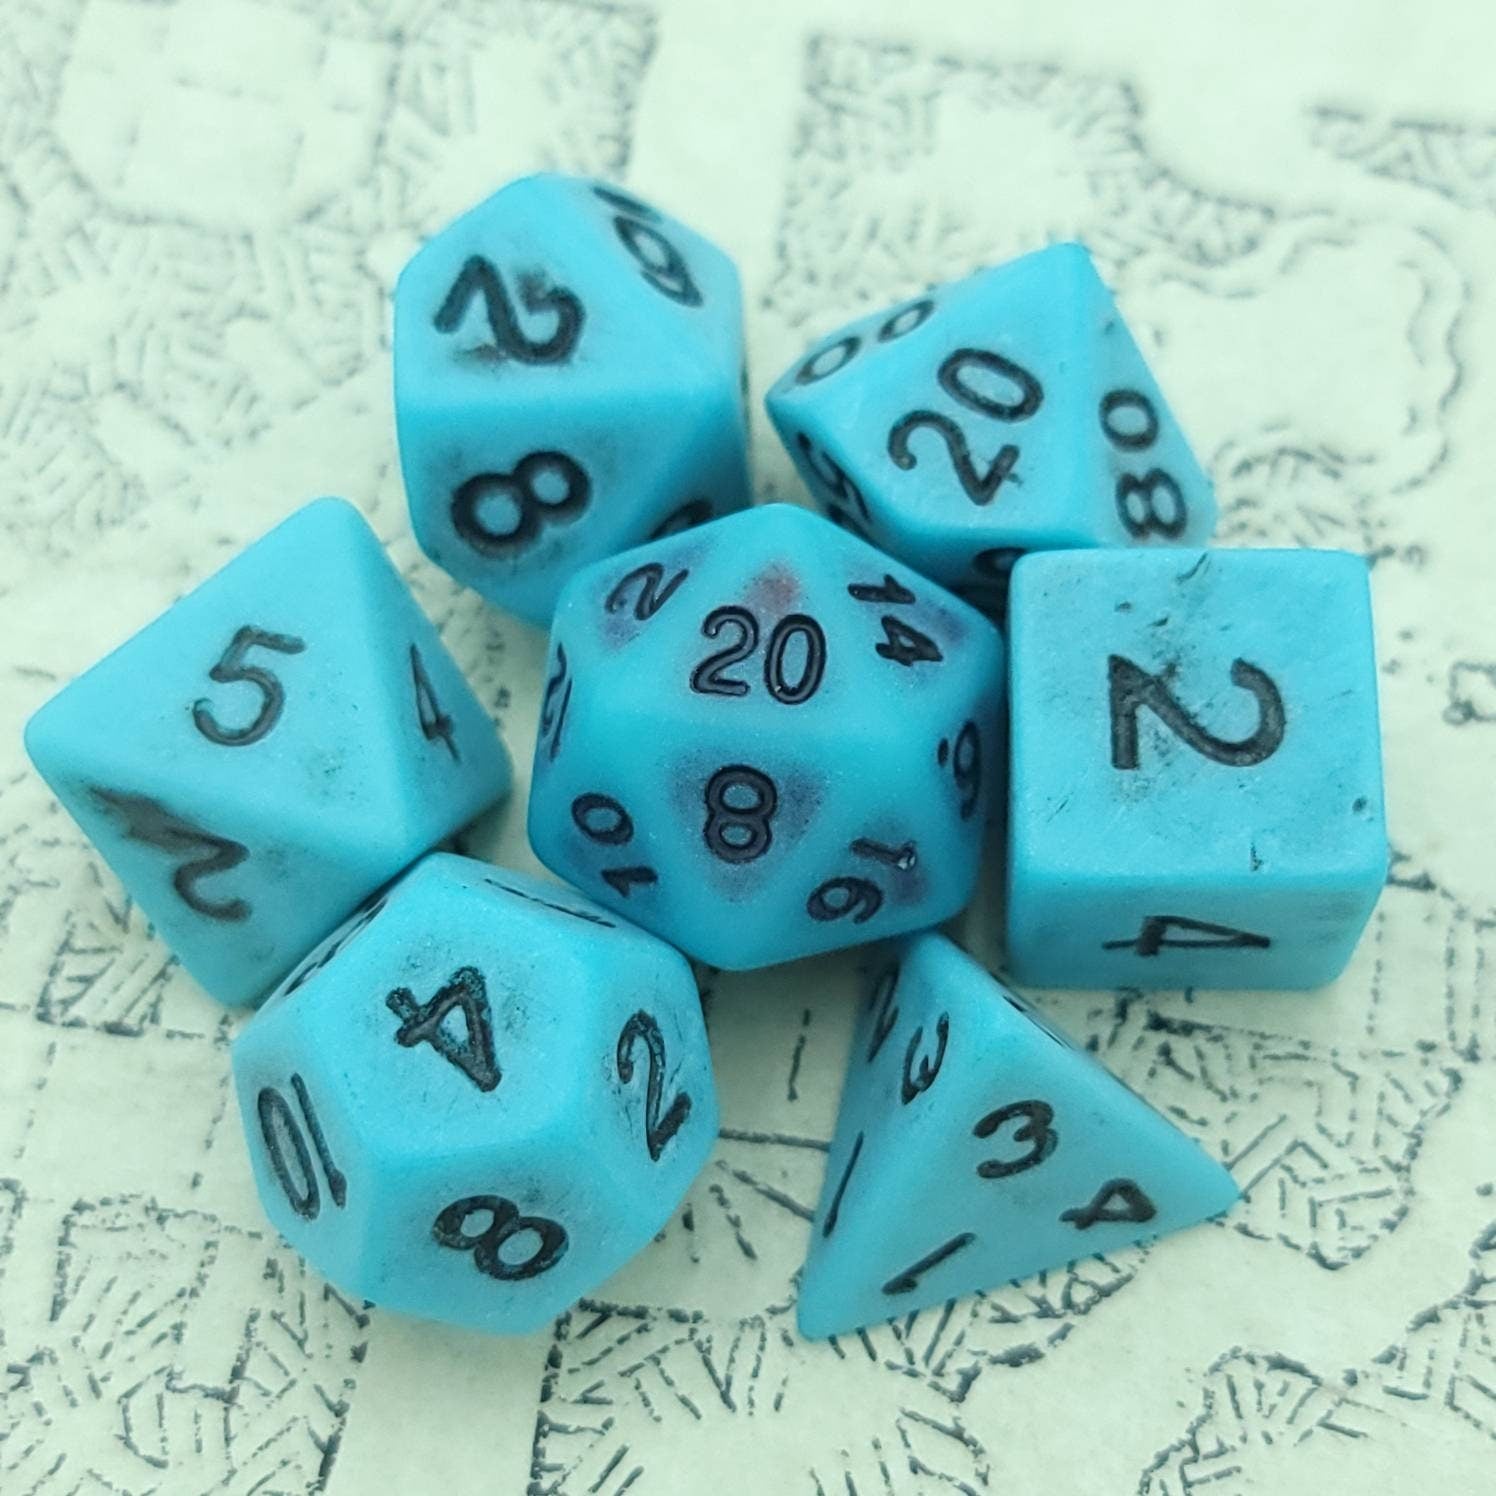 Ancient Turquoise | RPG Dice Set| RPG Dice | Polyhedral Dice Set | Dungeons and Dragons | DnD Dice Set | Gaming Dice Set